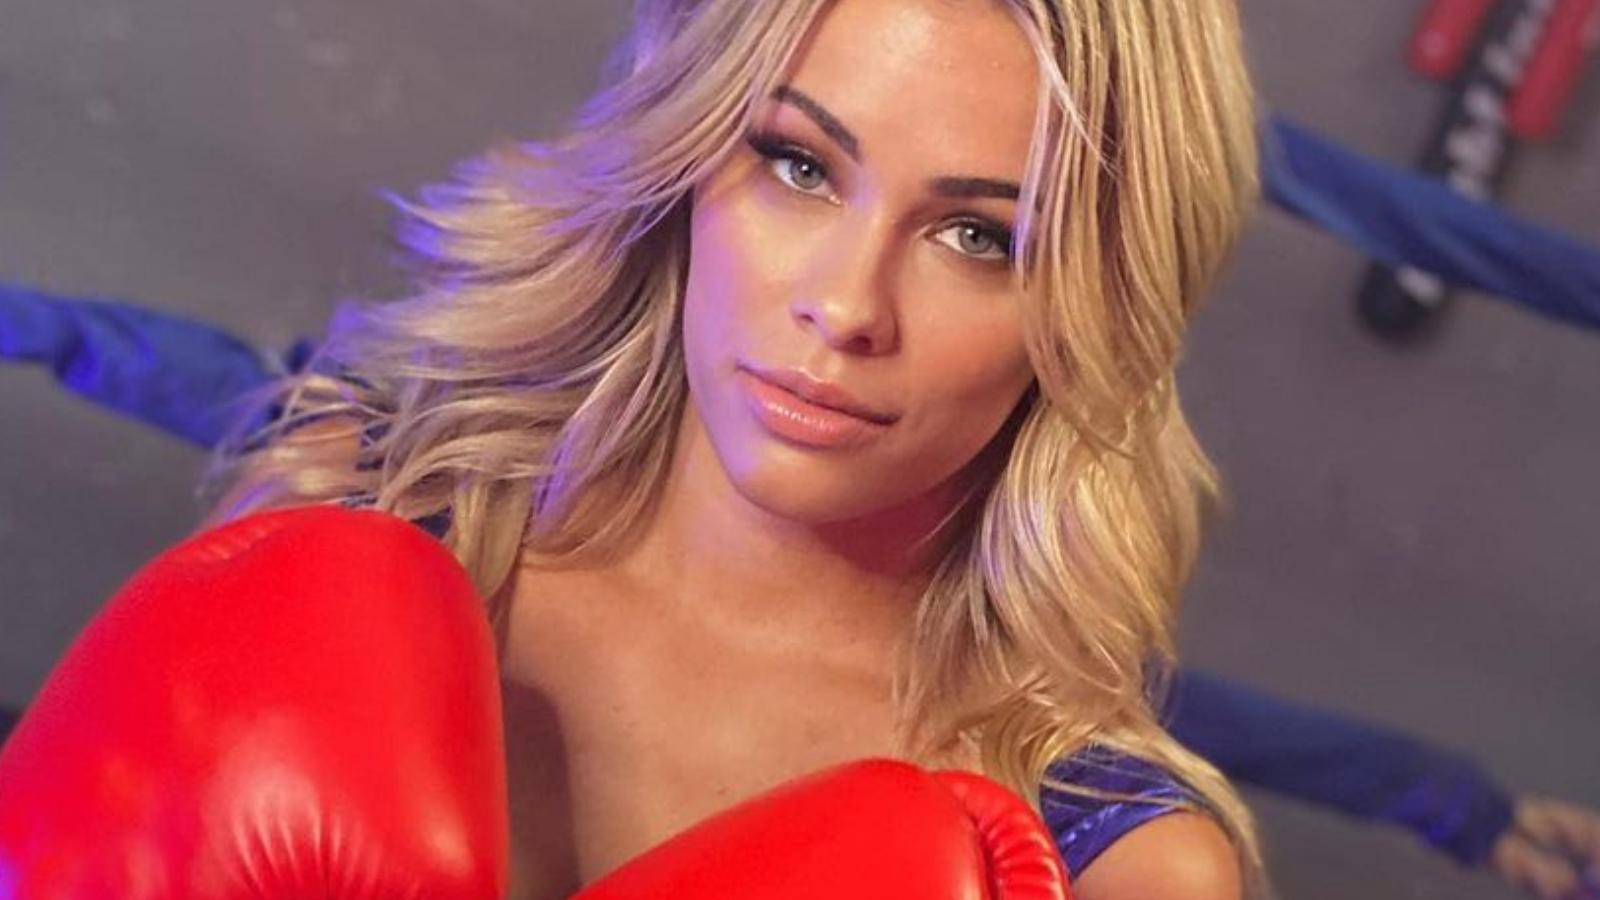 Ufcs Paige Vanzant Makes More On Onlyfans In 24 Hours Than Whole Fighting Career Dexerto 3607